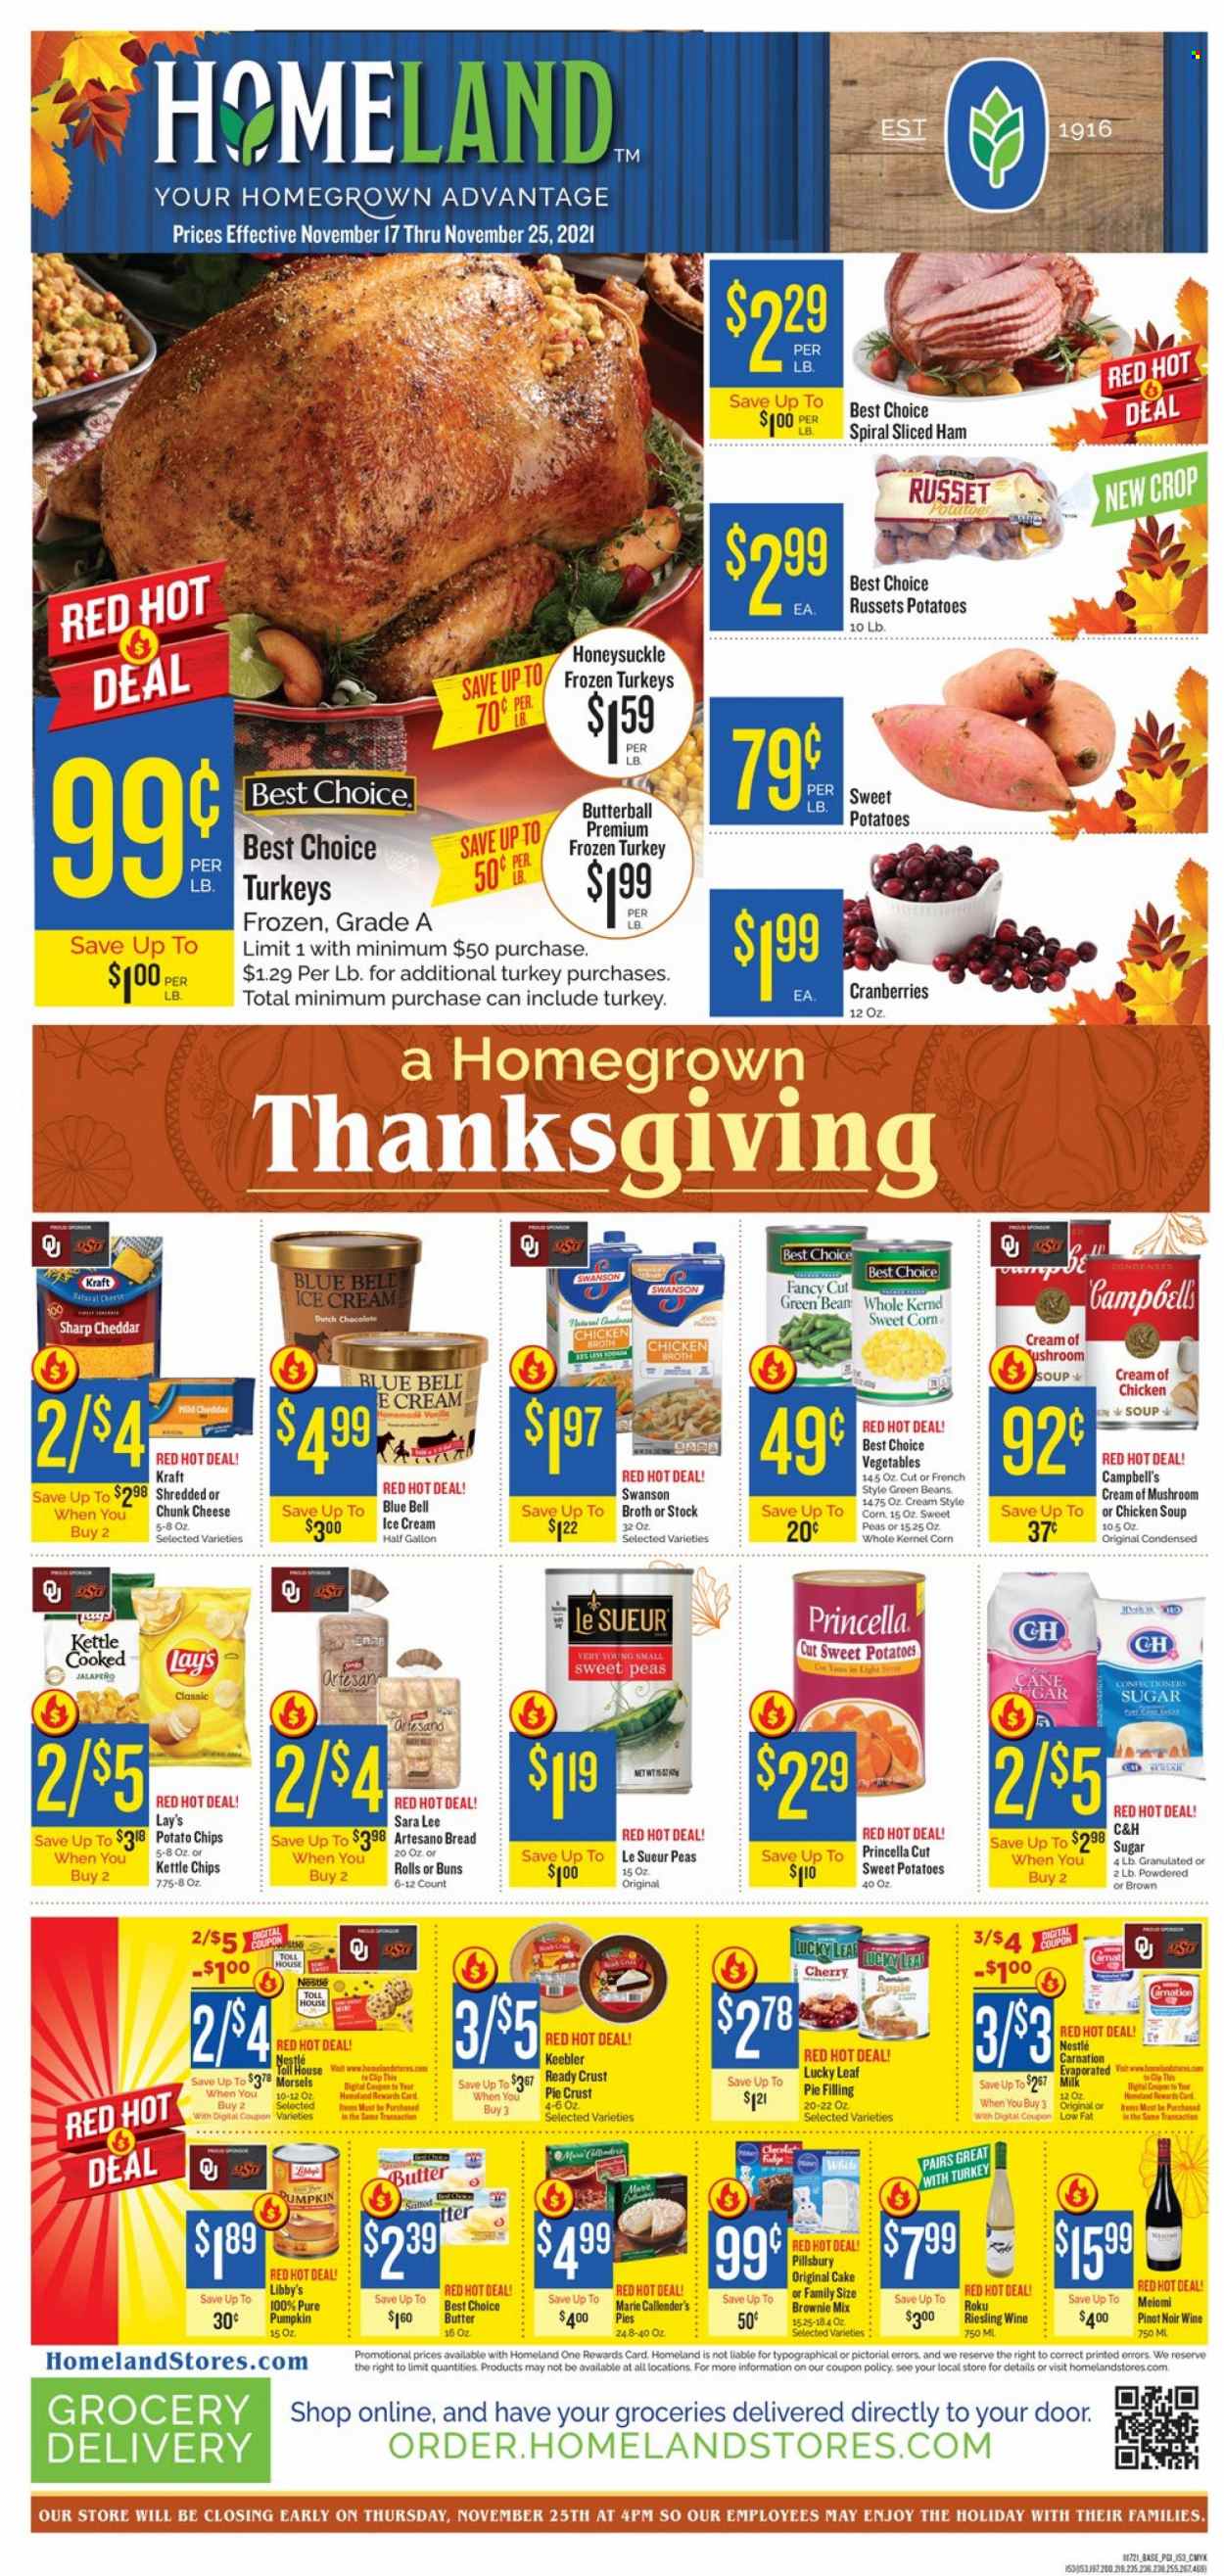 thumbnail - Homeland Flyer - 11/17/2021 - 11/25/2021 - Sales products - bread, cake, buns, Sara Lee, brownie mix, beans, green beans, russet potatoes, sweet potato, pumpkin, peas, jalapeño, Campbell's, chicken soup, soup, Pillsbury, Marie Callender's, Kraft®, Butterball, ham, cheese, chunk cheese, milk, ice cream, Blue Bell, fudge, Nestlé, Keebler, potato chips, Lay’s, sugar, pie crust, pie filling, chicken broth, broth, cranberries, red wine, Riesling, white wine, wine, Pinot Noir, whole turkey. Page 1.